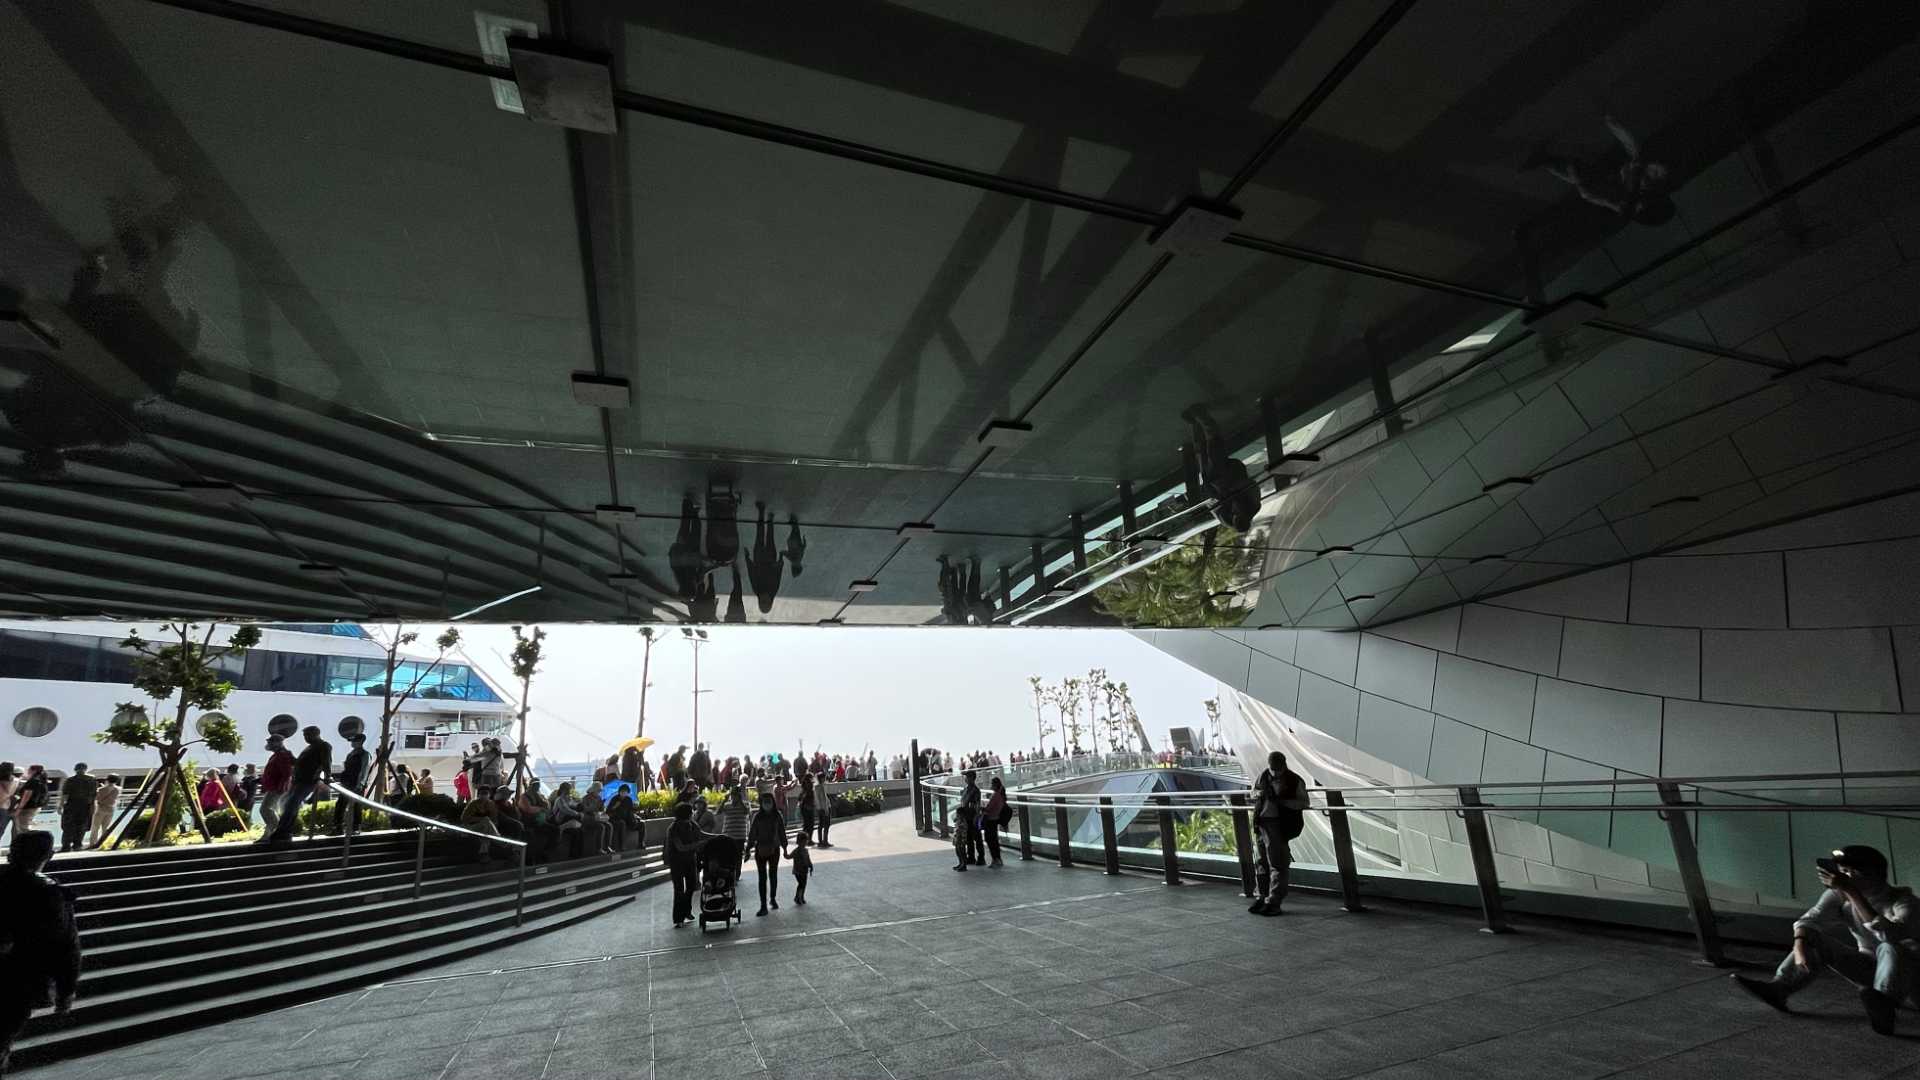 A mirrored ceiling projects out over the entranceway. Crowds of people are walking on the viewing deck behind, with the Nautica cruise ship docked alongside. The viewing deck is roughly level with the bridge of the cruise ship.